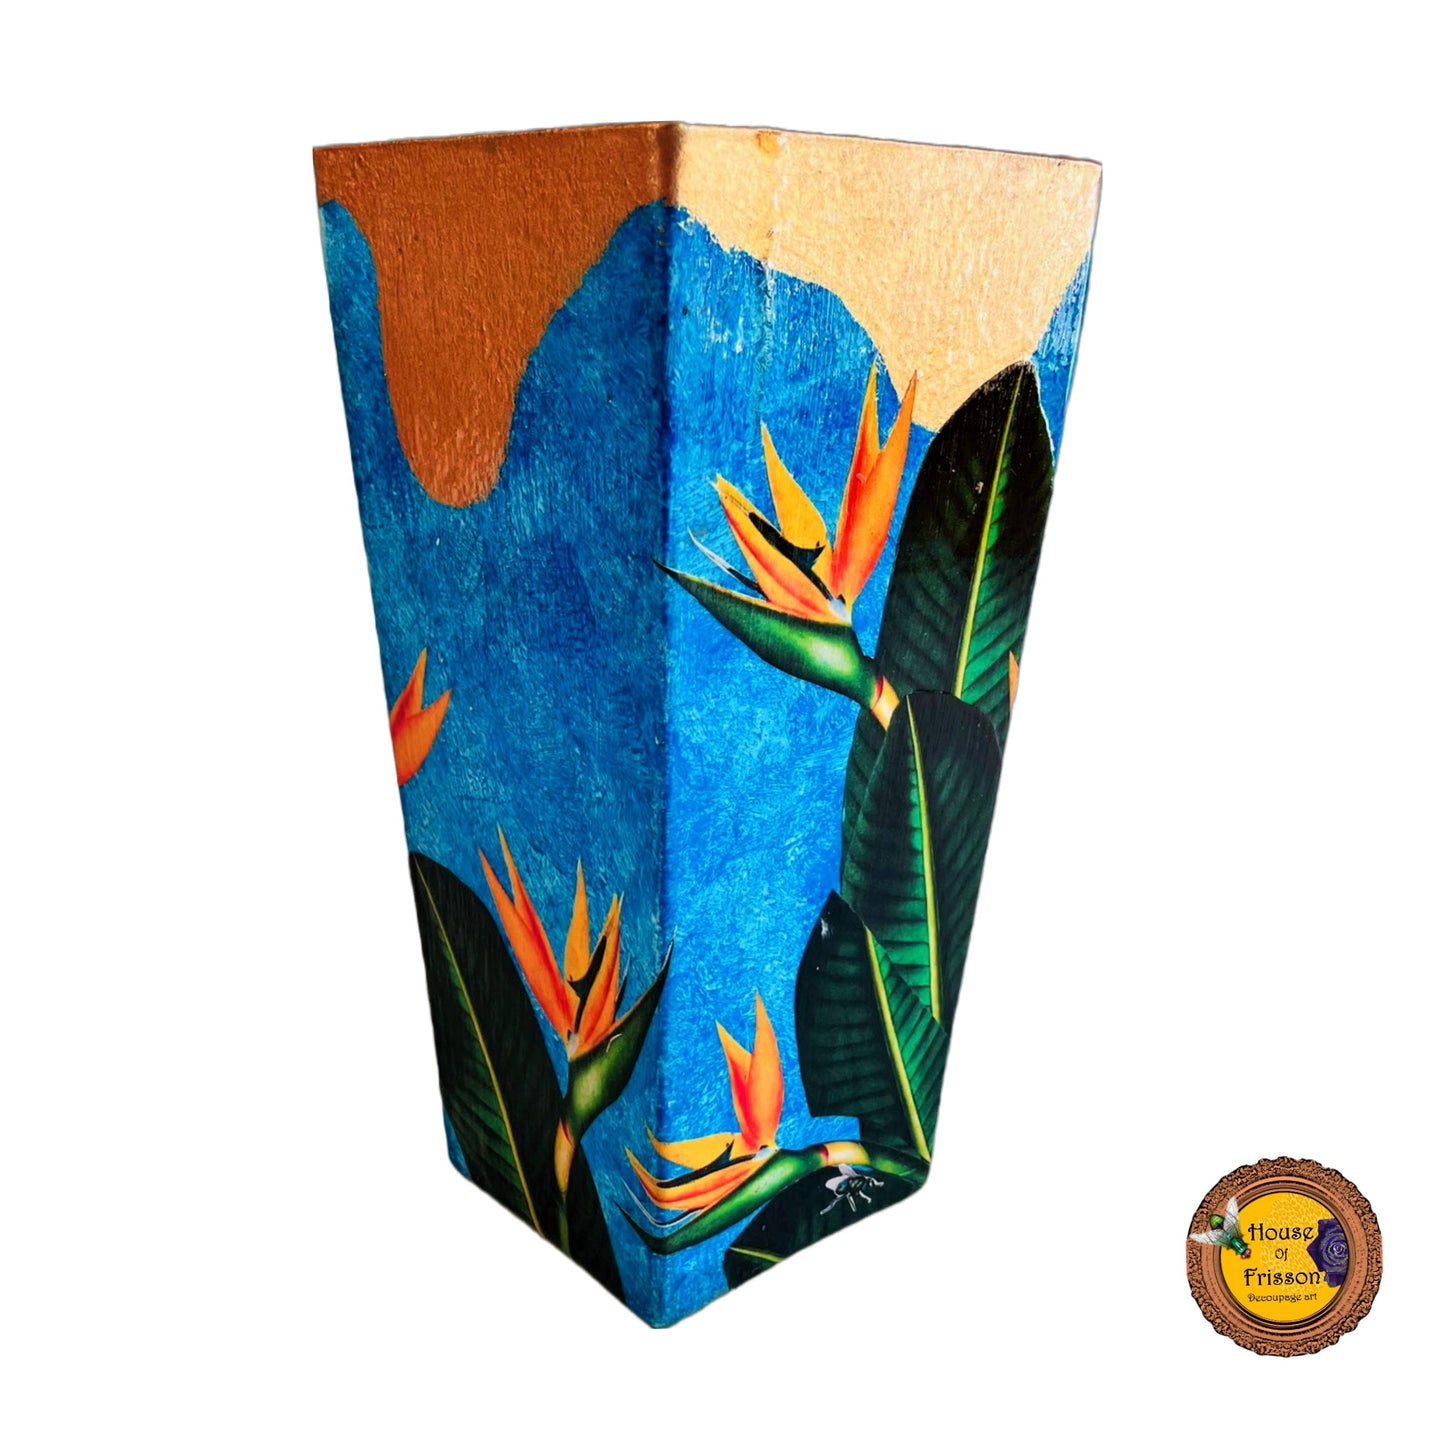 "Strelitzia" Flower Vase by House of Frisson, featuring strelitzia flowers and leaves, on a blue and golden background.